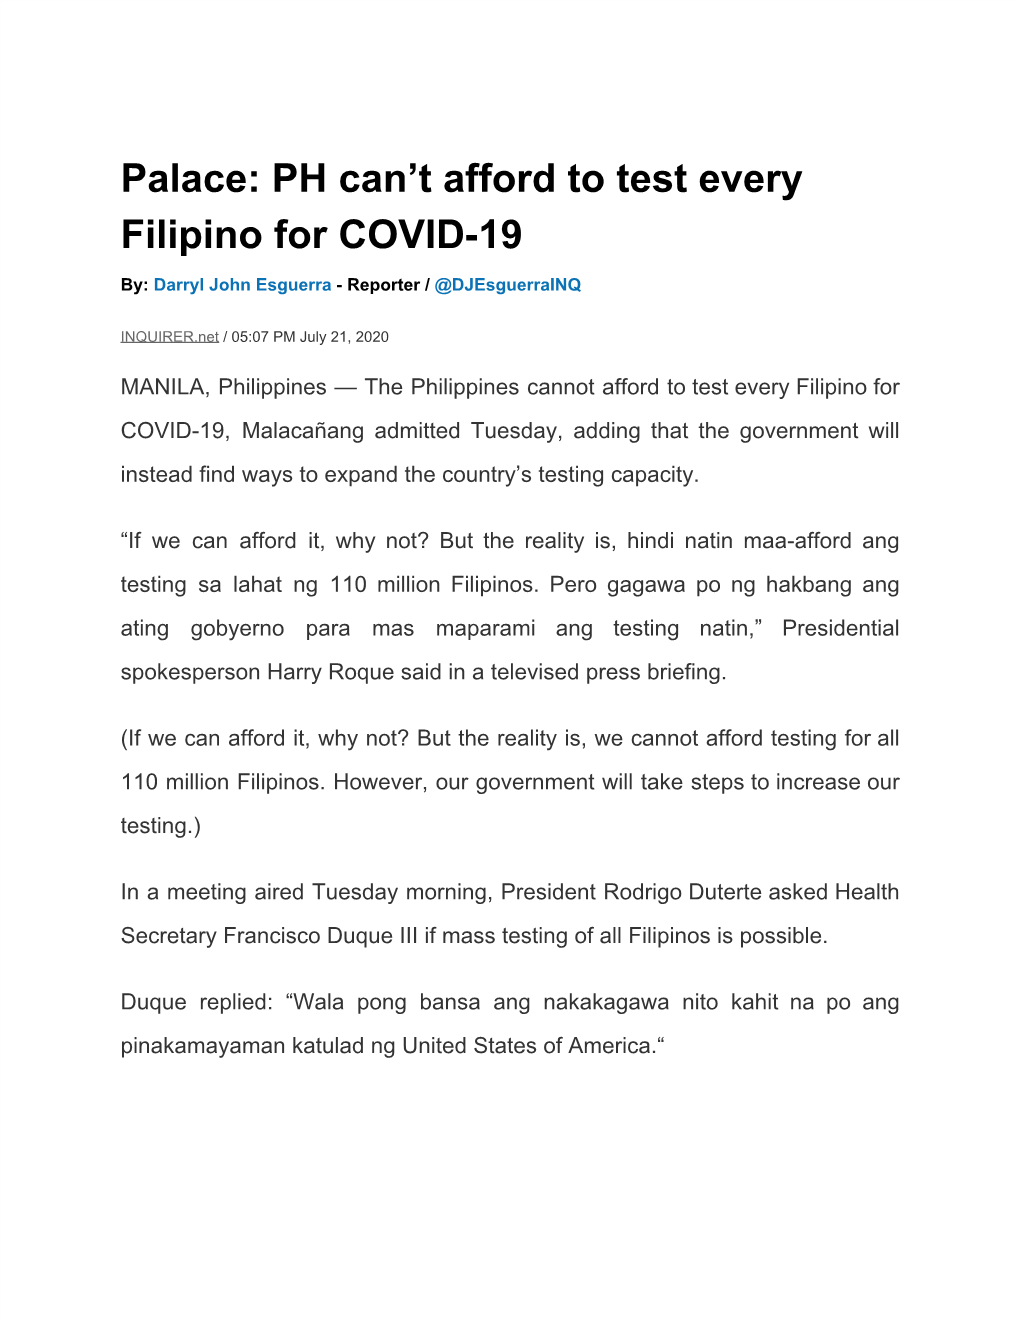 Palace: PH Can't Afford to Test Every Filipino for COVID-19